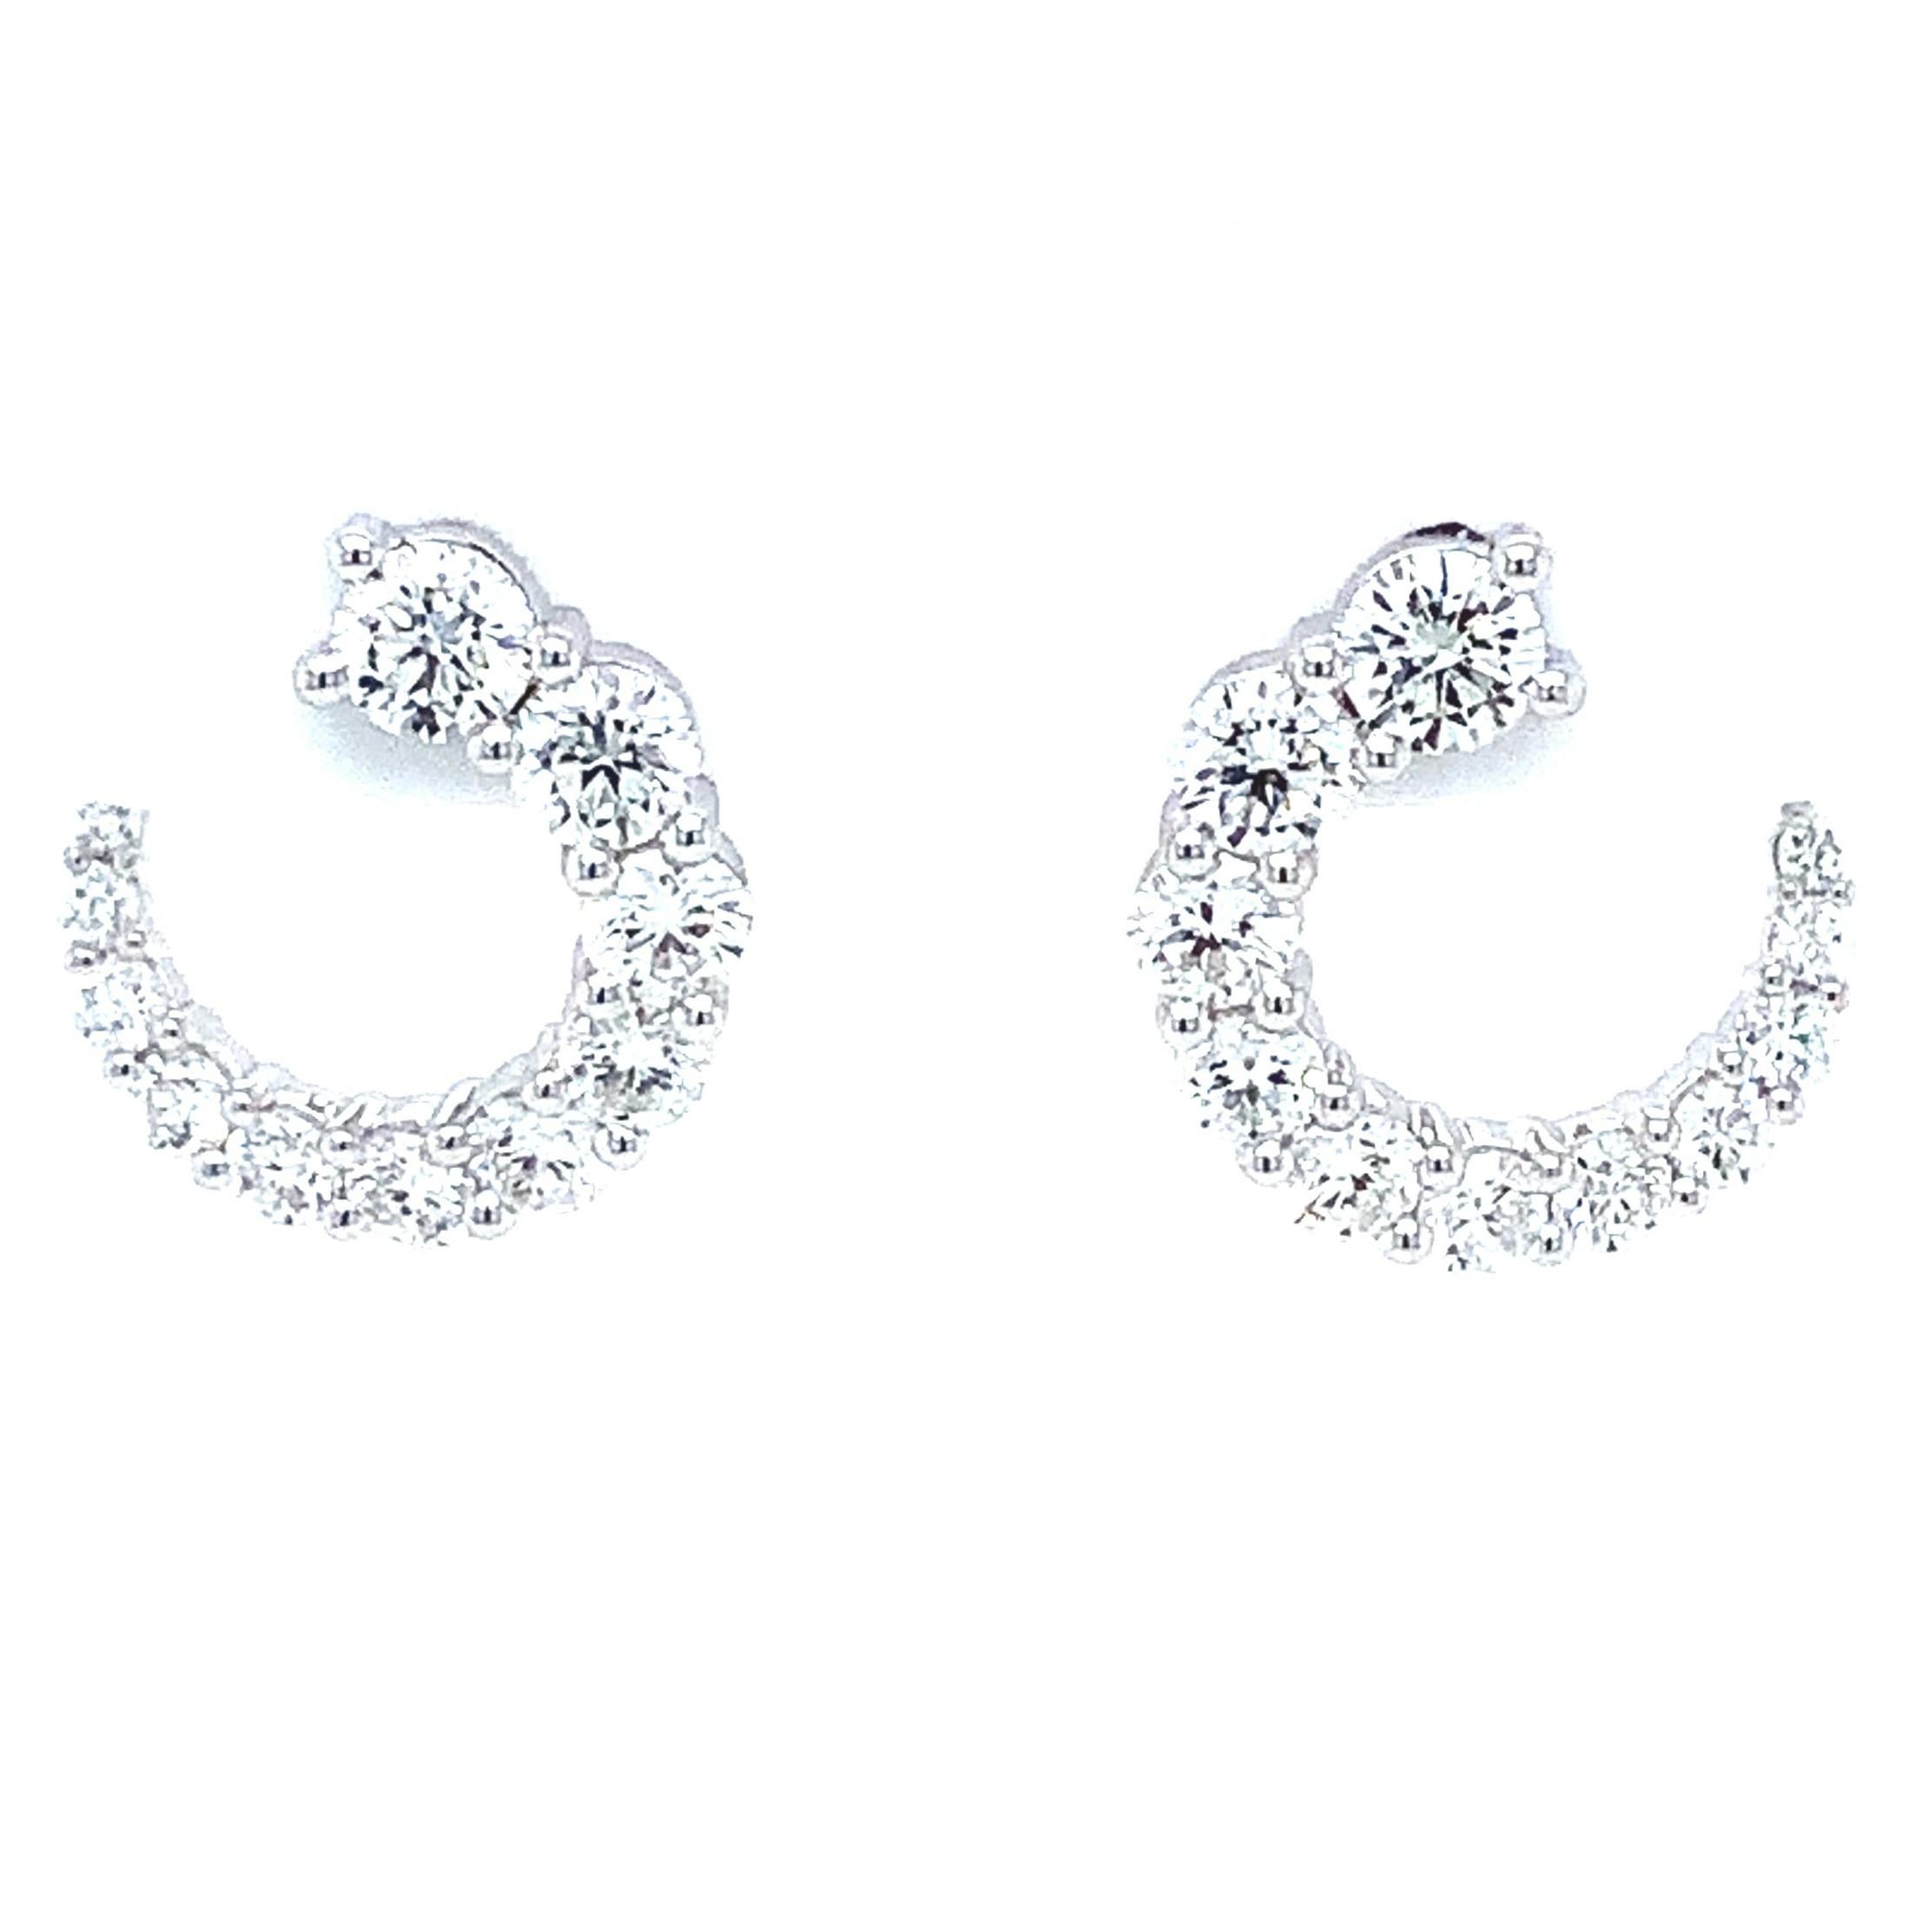 The Memoire Luna Wrap Collection Diamond Earring with 18Karat White Gold features 22 Round Brilliant Cut Diamonds with a total carat weight of 1.30cts t.w., exhibiting F-G in Color, VS1 Clarity, Ideal Make and Polish, a diameter of 11.90mm x 9.06mm,